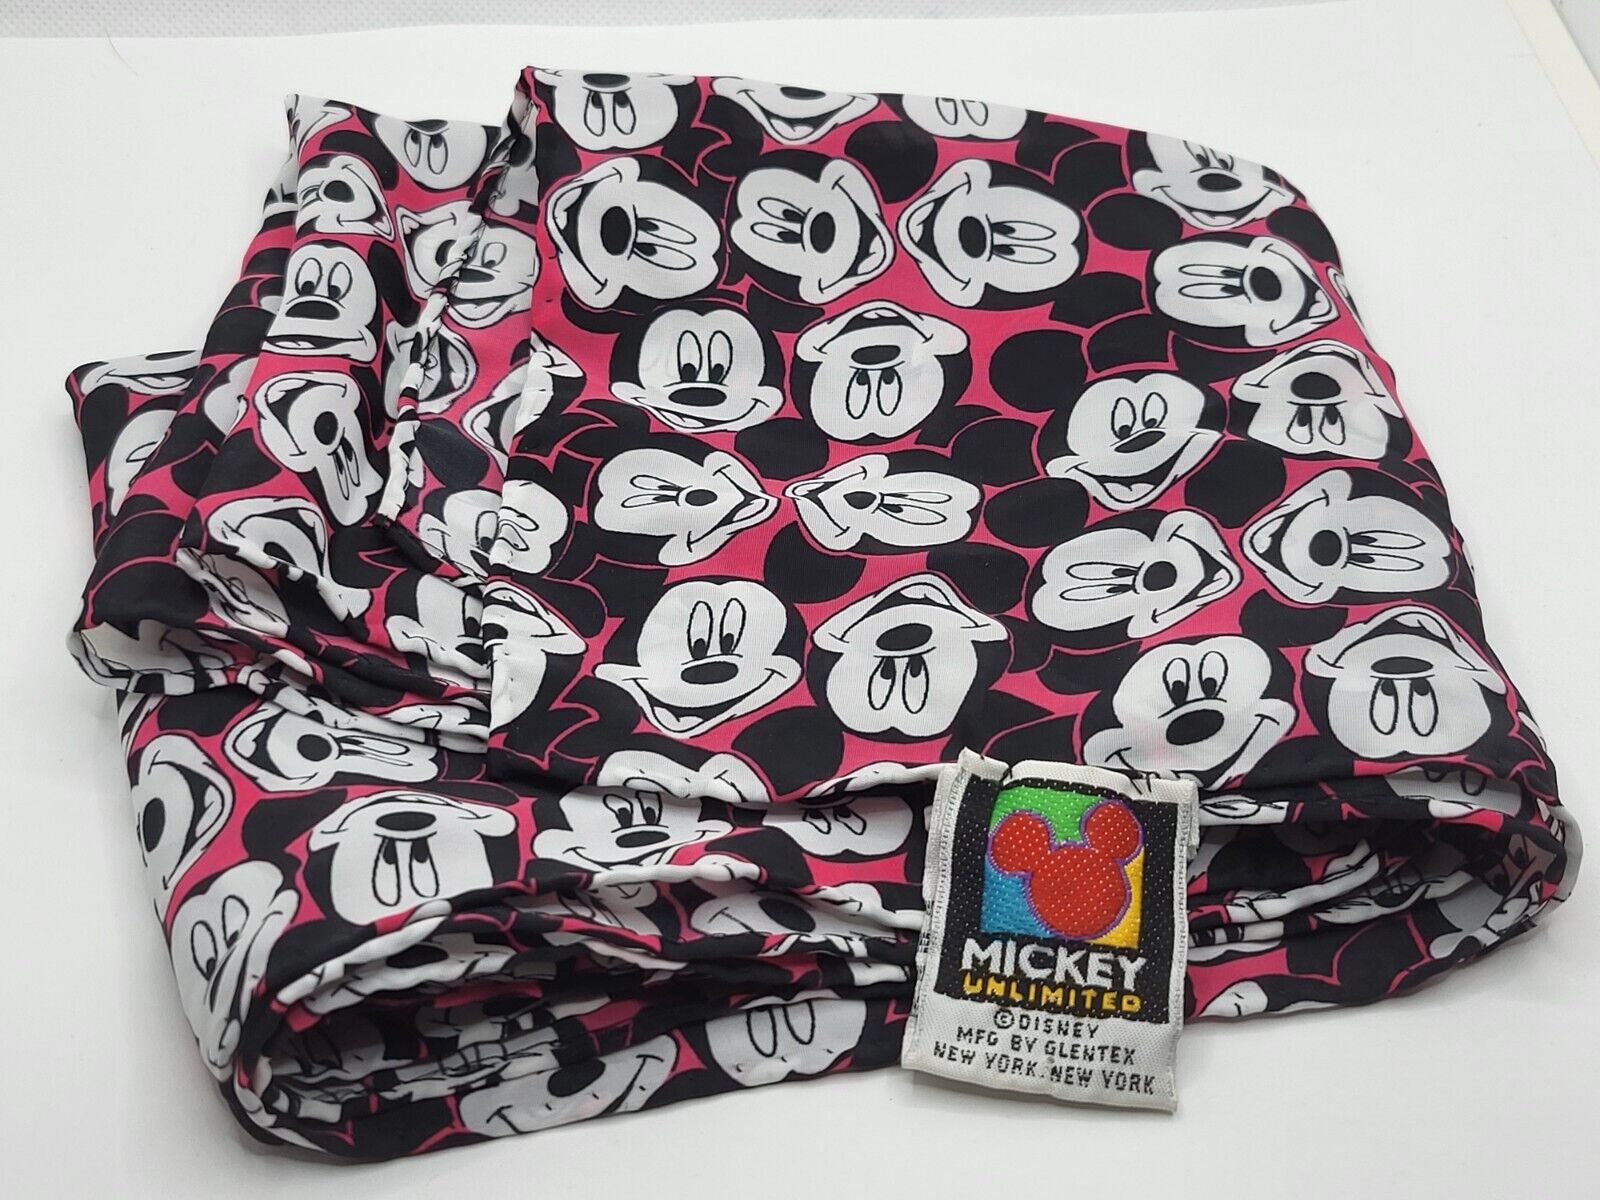 Vintage Mickey Unlimited Disney Scarf PINK Mickey Mouse (10